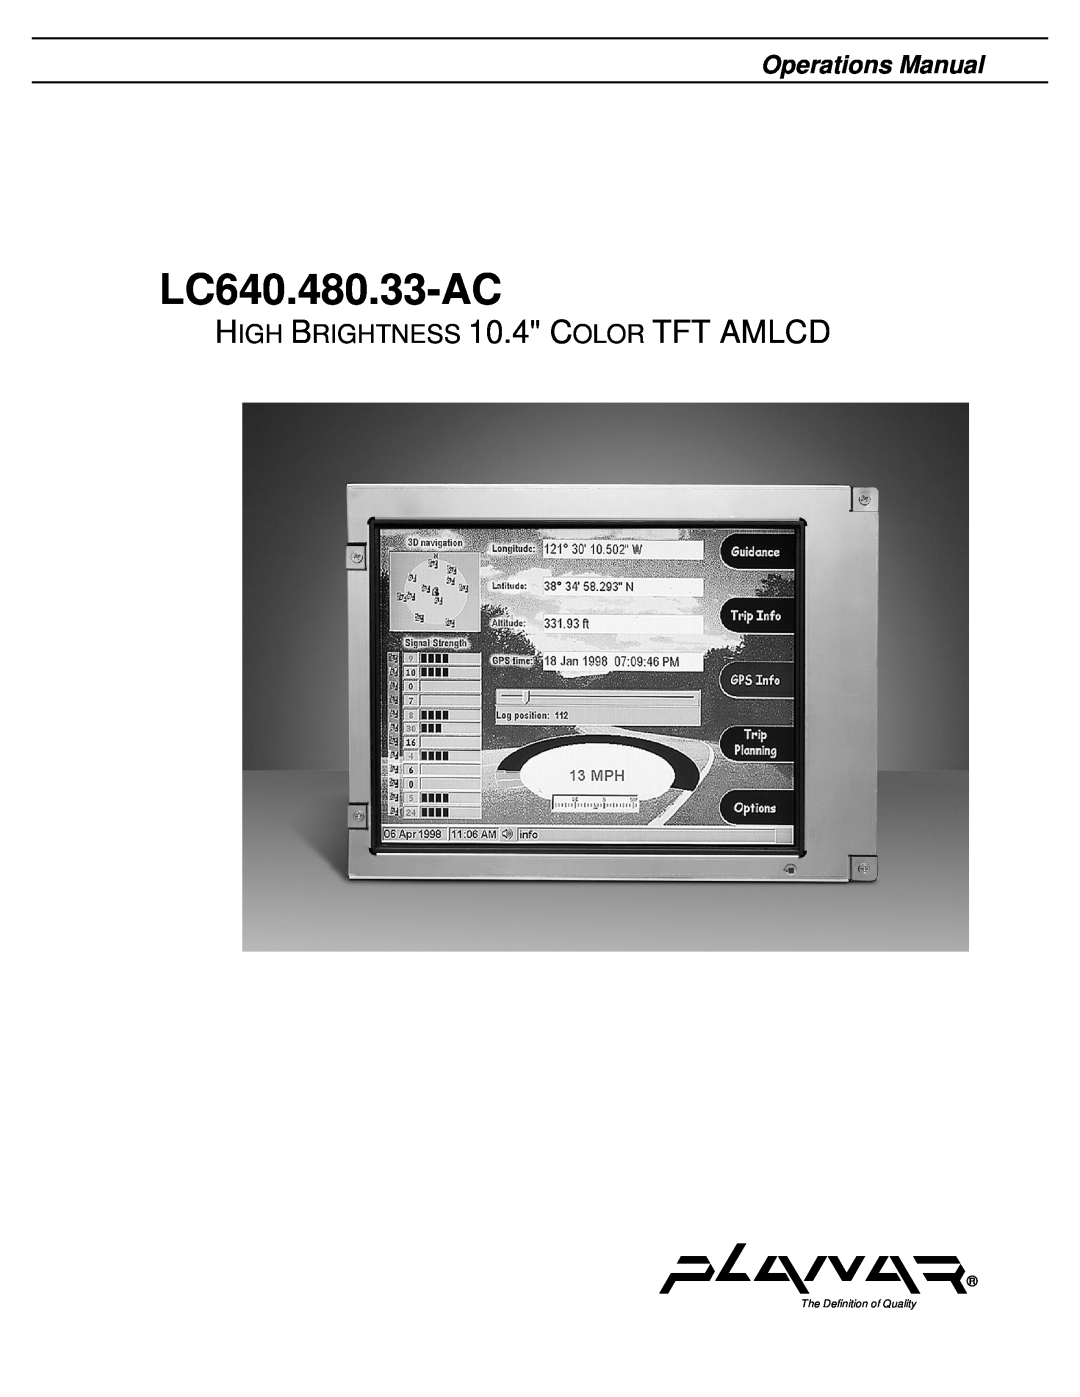 Planar LC640.480.33-AC manual Operations Manual, HIGH BRIGHTNESS 10.4 COLOR TFT AMLCD, The Definition of Quality 